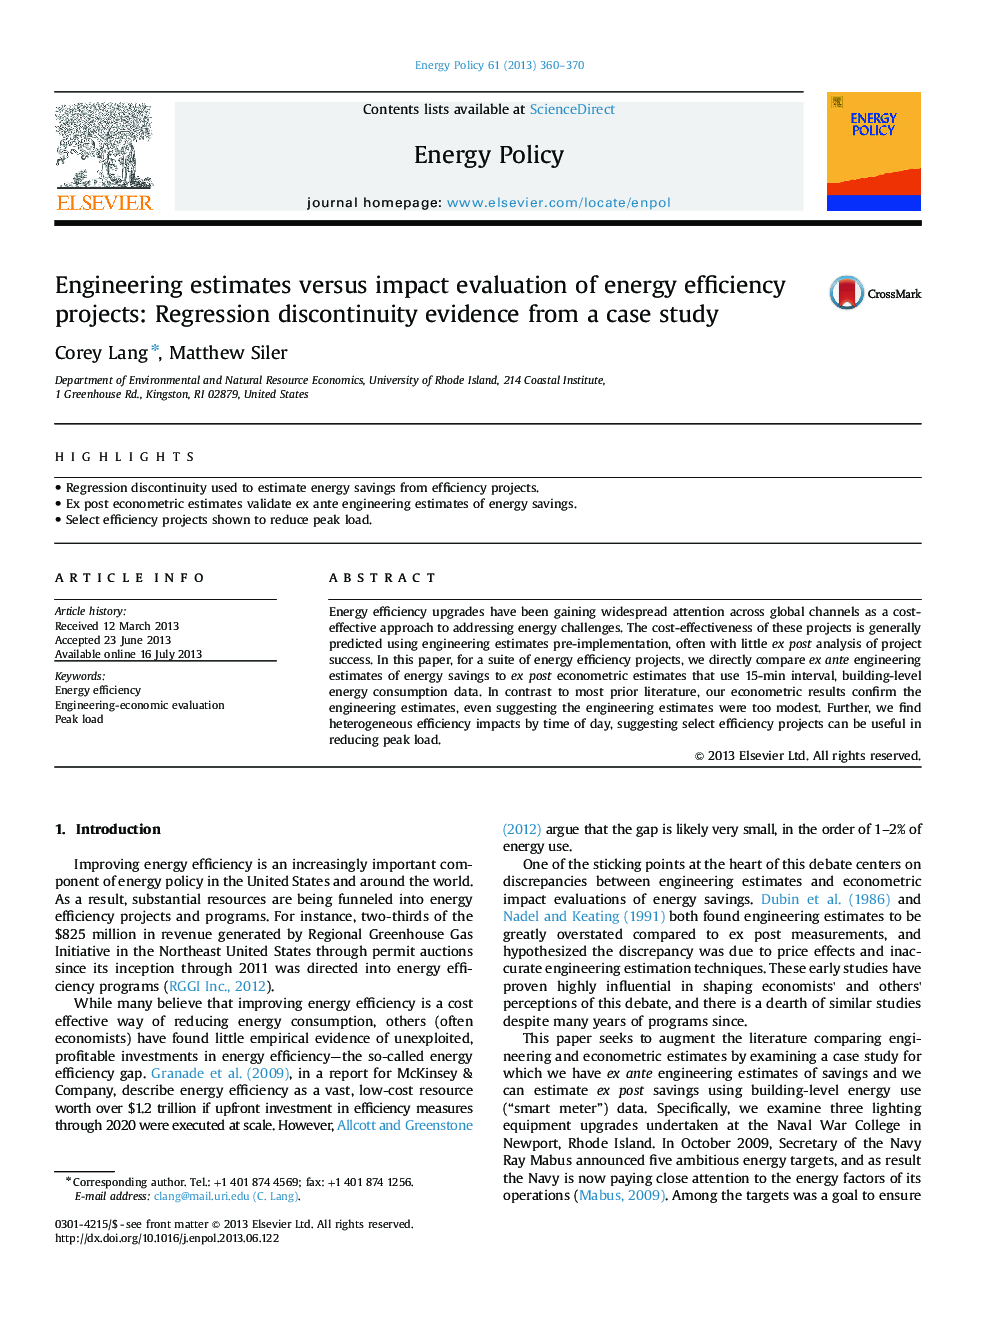 Engineering estimates versus impact evaluation of energy efficiency projects: Regression discontinuity evidence from a case study